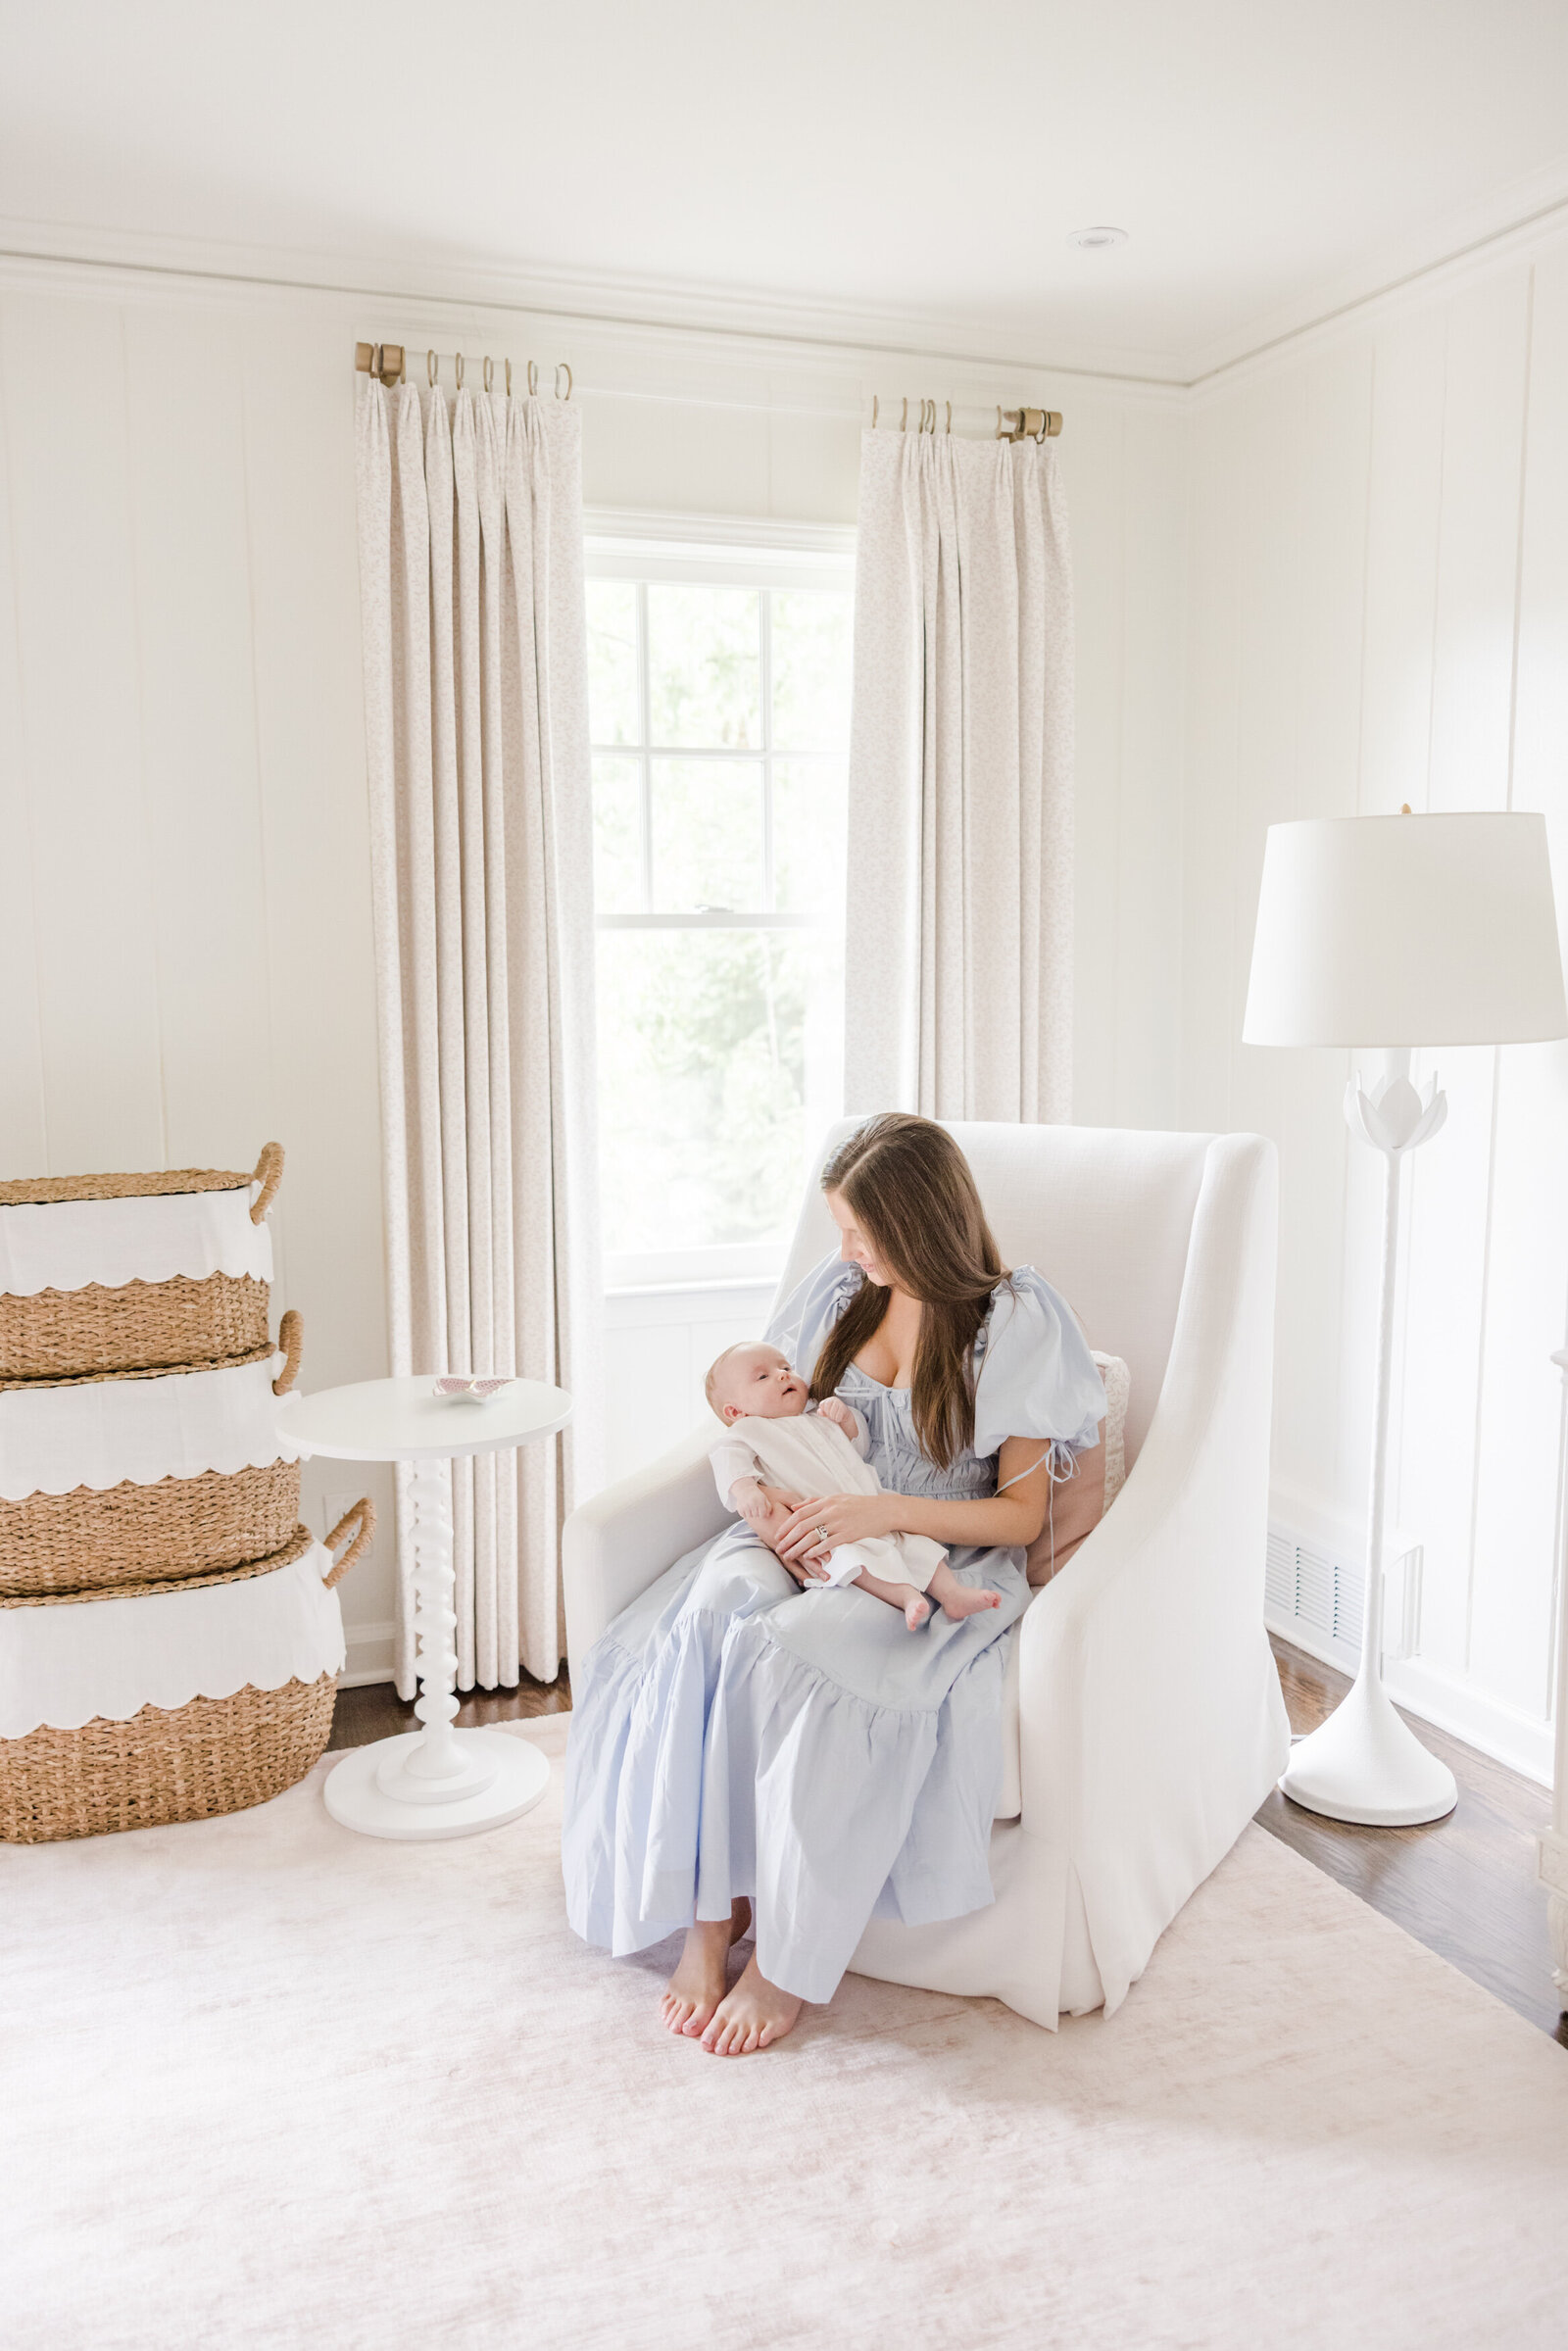 Mother seating in a white glider smiling down at newborn in her arms.